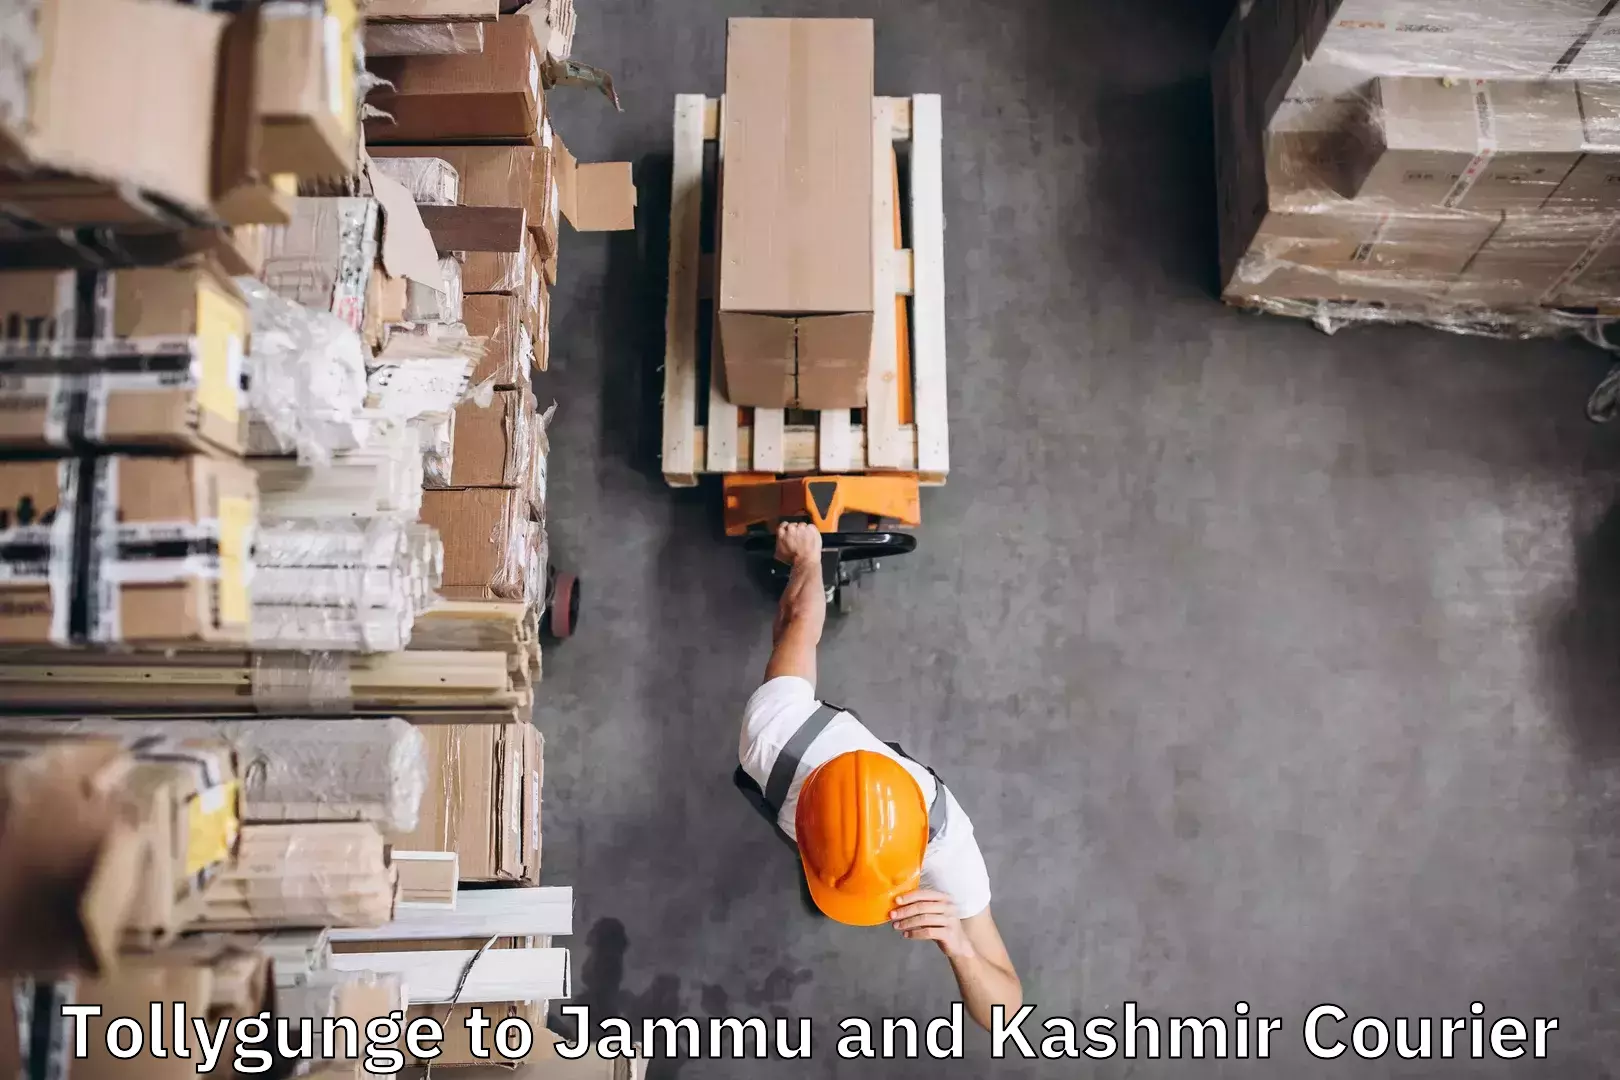 Luggage shipment specialists Tollygunge to Jammu and Kashmir